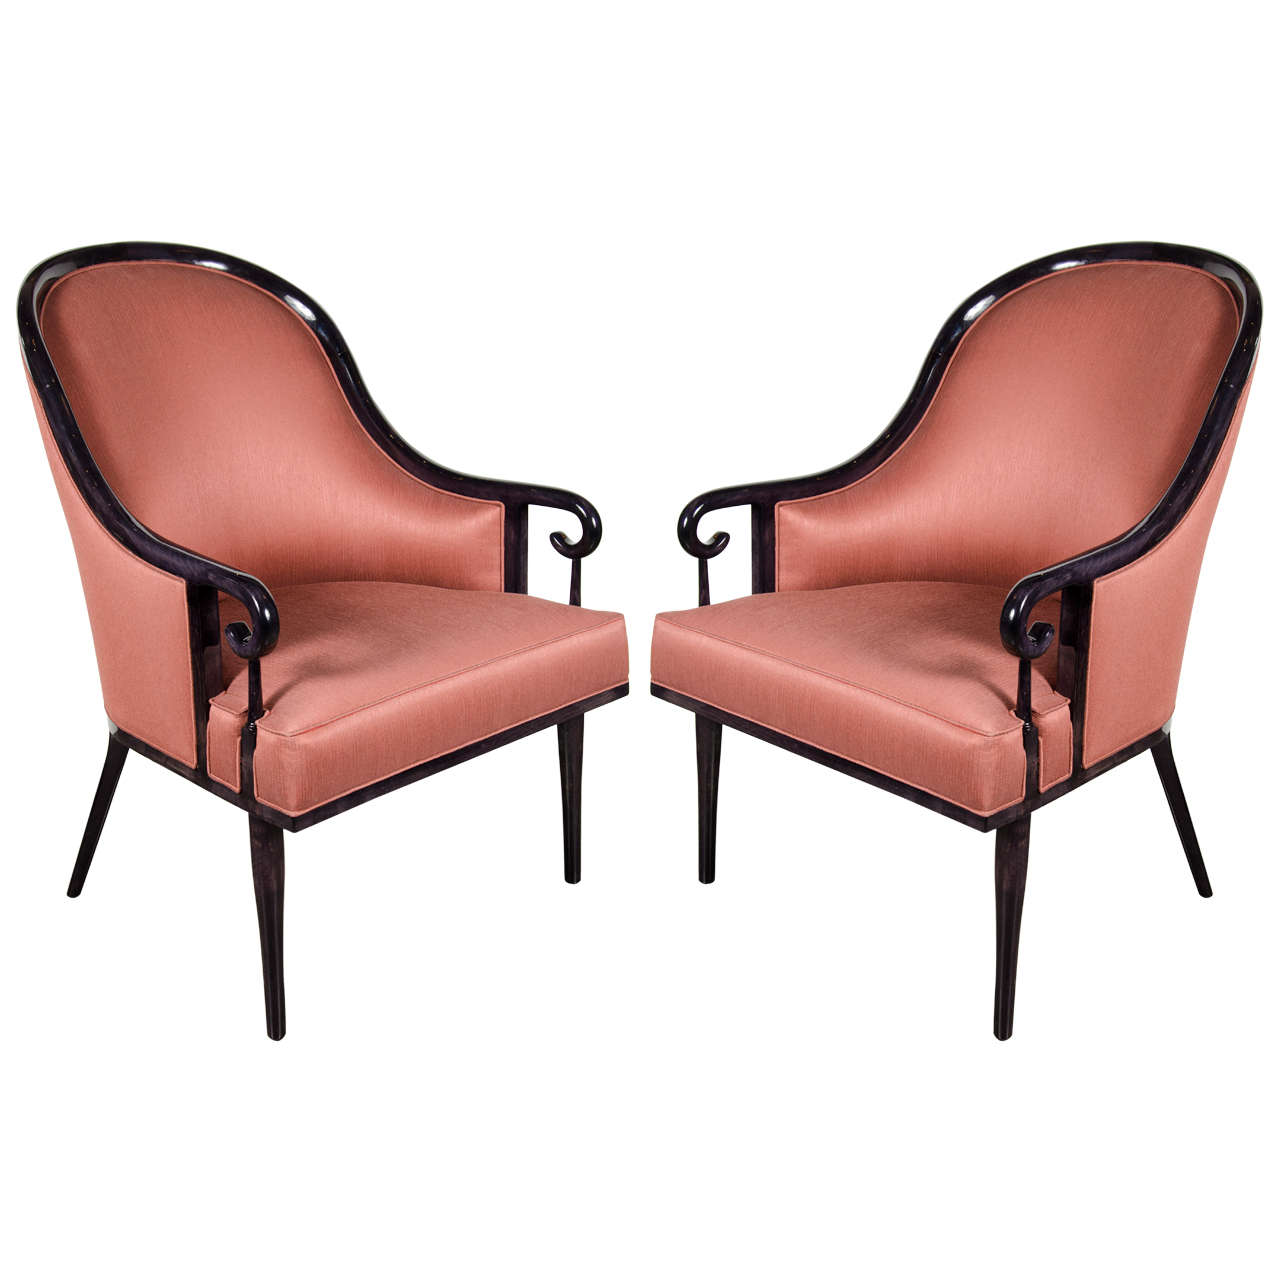 Ultra Chic Pair of Mid-Century Scroll Arm Chairs with Spoon Back design